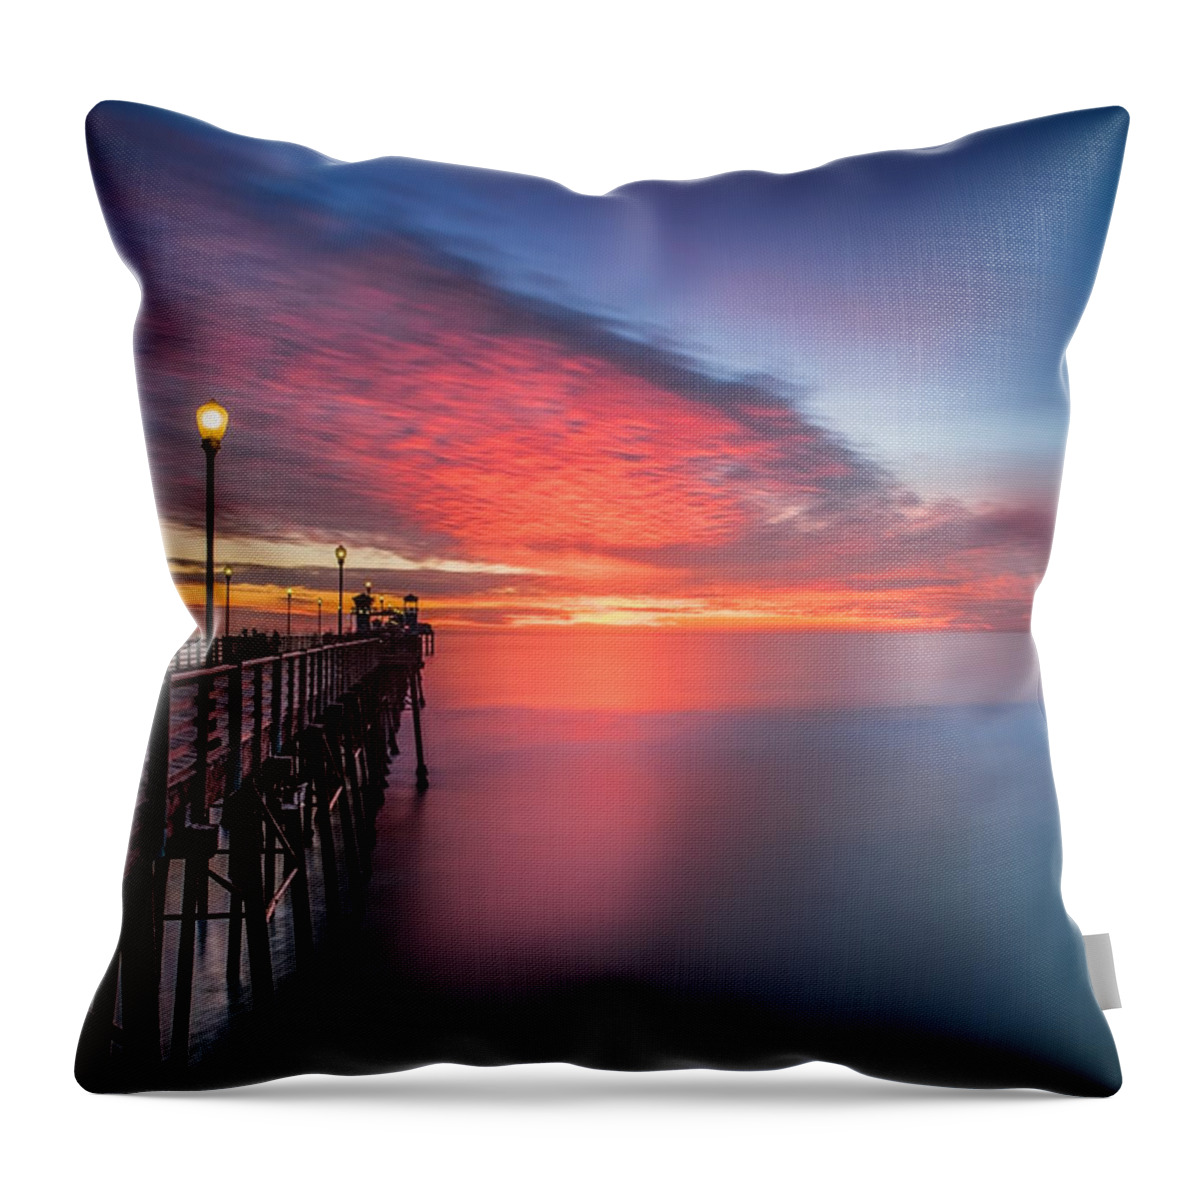 Ocean Throw Pillow featuring the photograph Oceanside Pier Sunset 16 by Larry Marshall